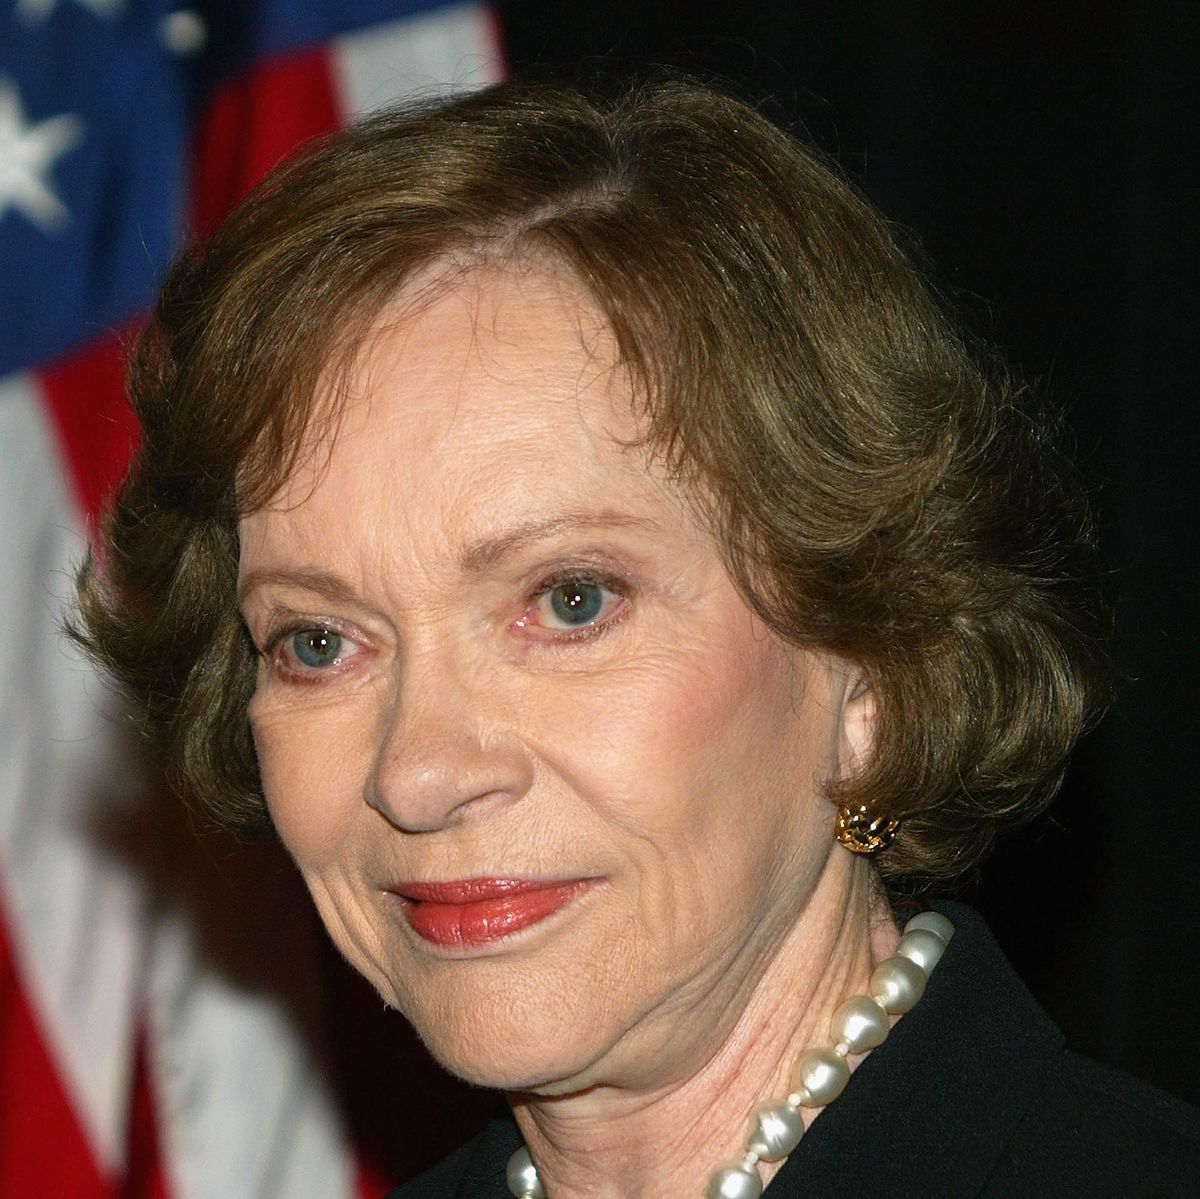 rosalynn carter stares past the camera with a slight smile on her face, she is wearing eye makeup, blush, and soft red lipstick, her brown hair is styled short with small curls away from her face, part of her large pearl necklace is visible, as is one of her gold earrings, in the blurred background is a black backdrop and an american flag